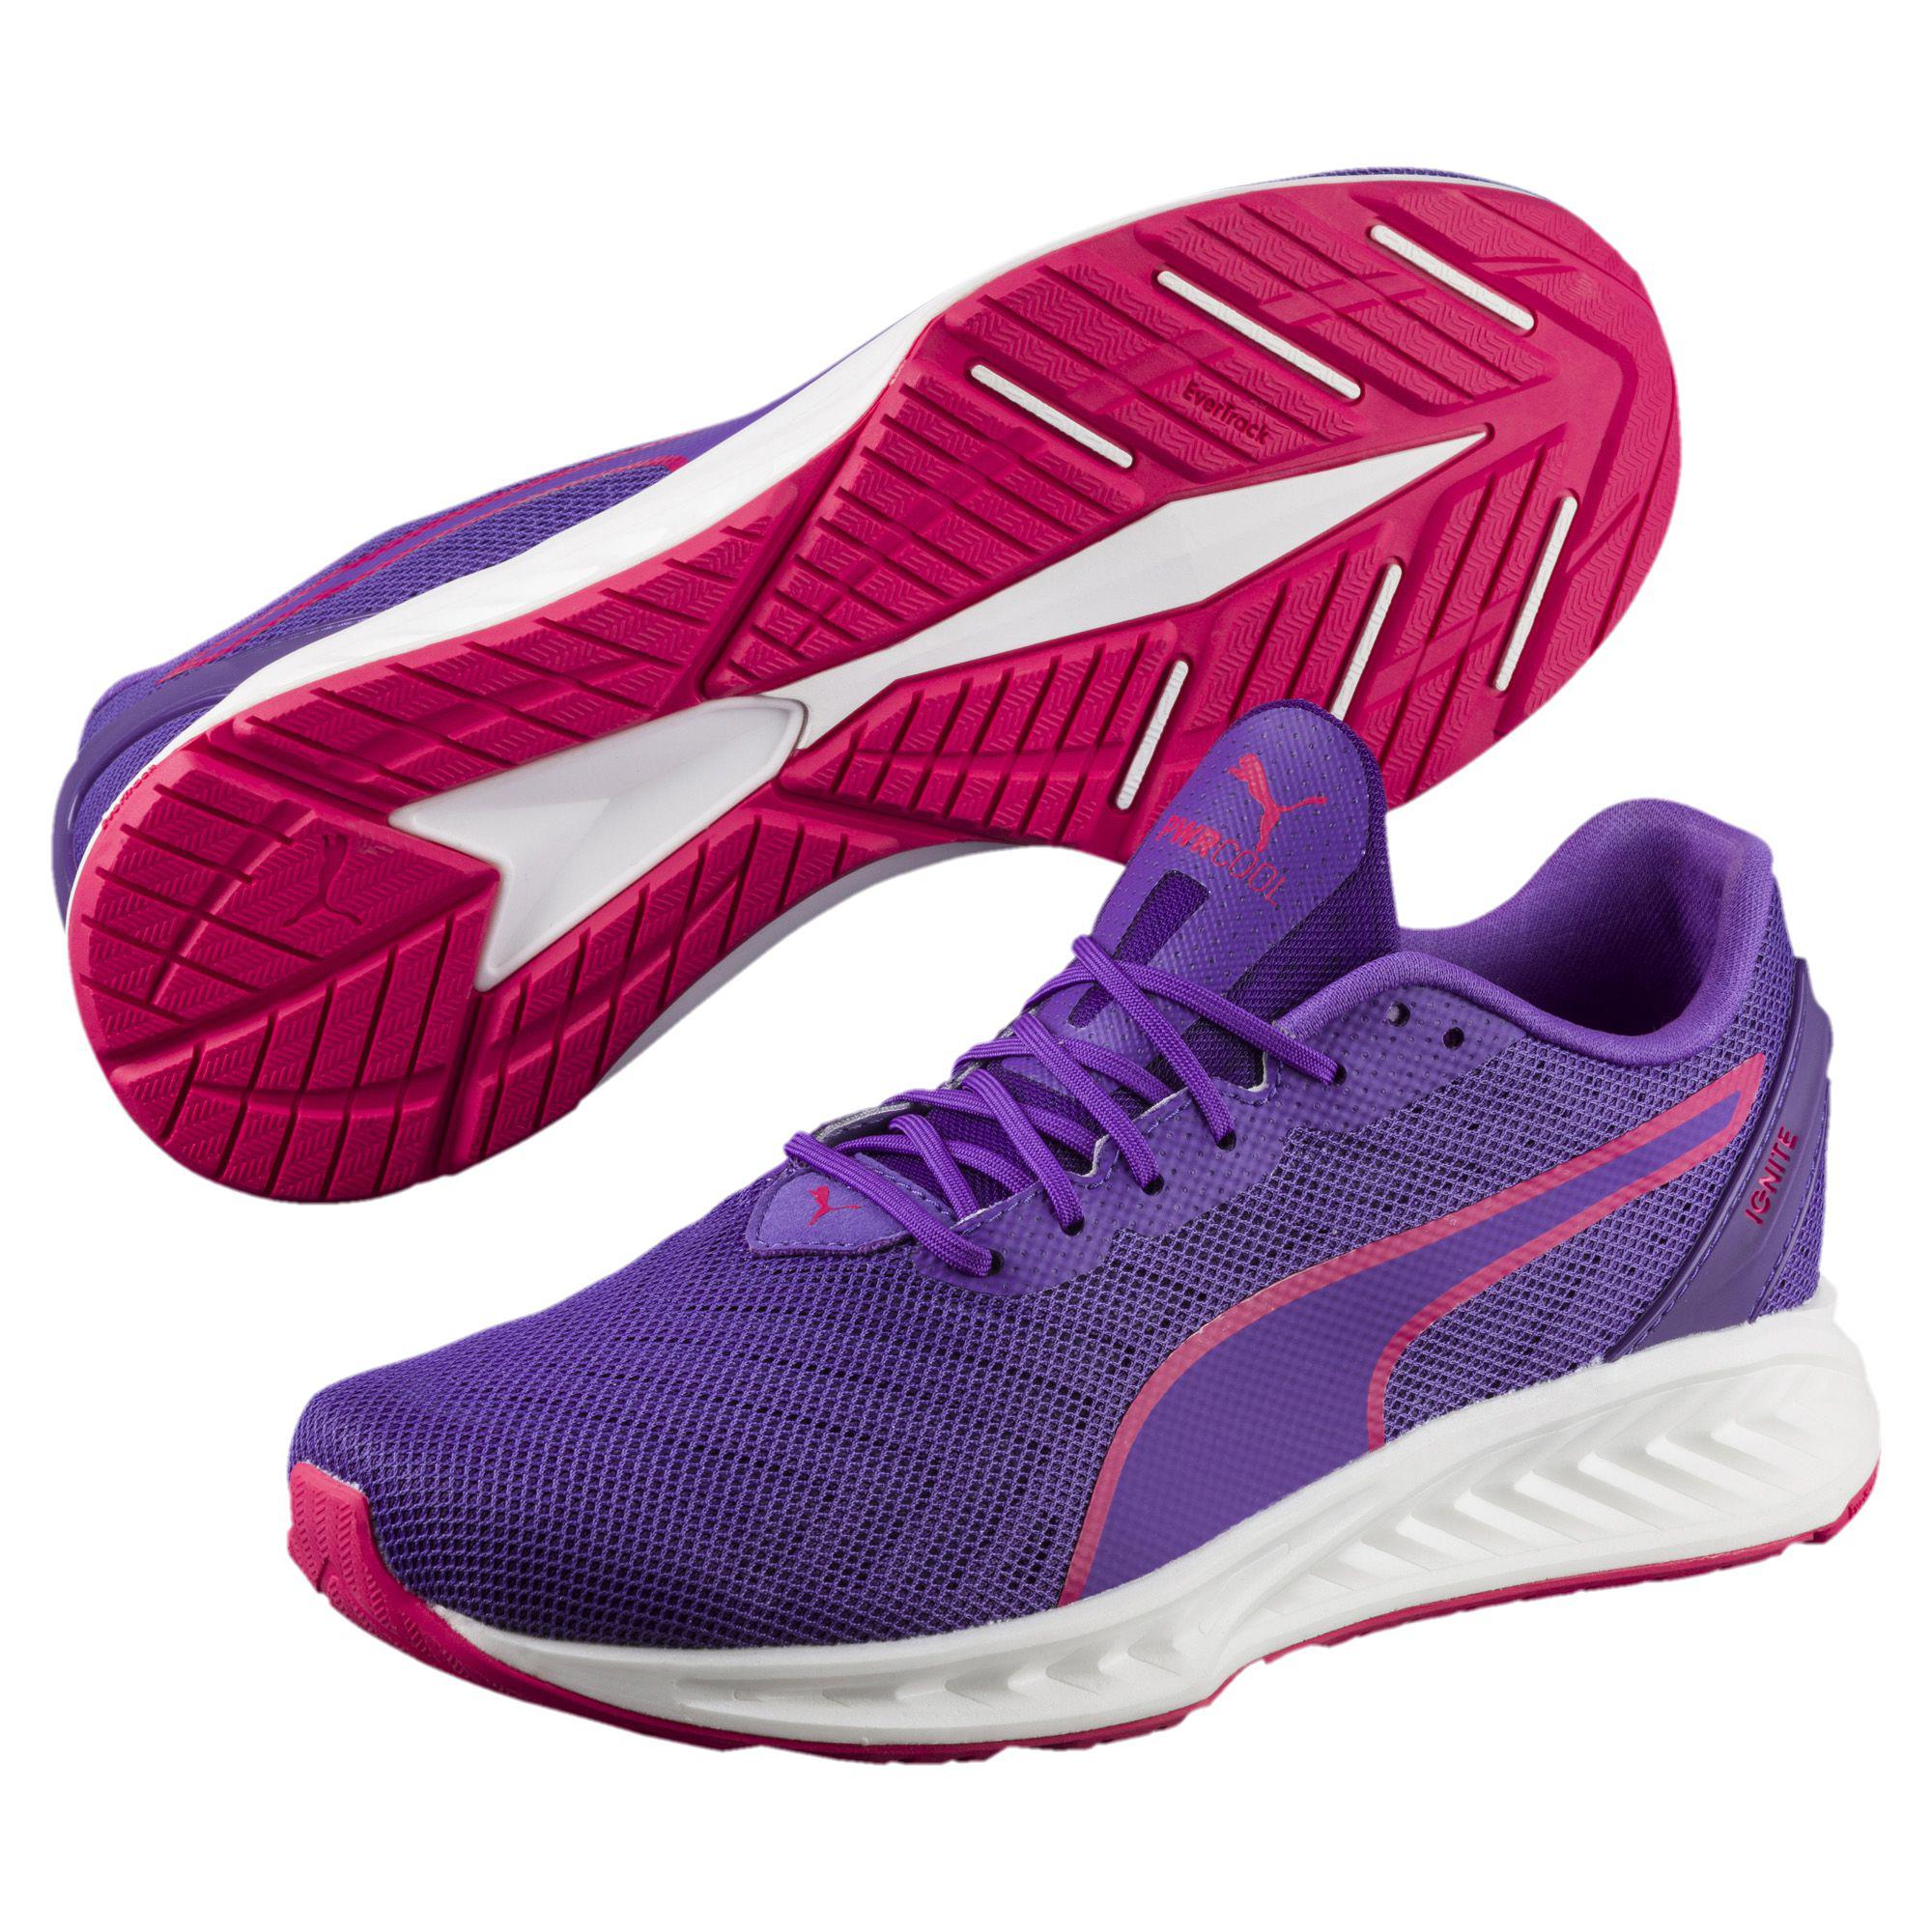 PUMA Rubber Ignite 3 Pwrcool Women's Running Shoes in